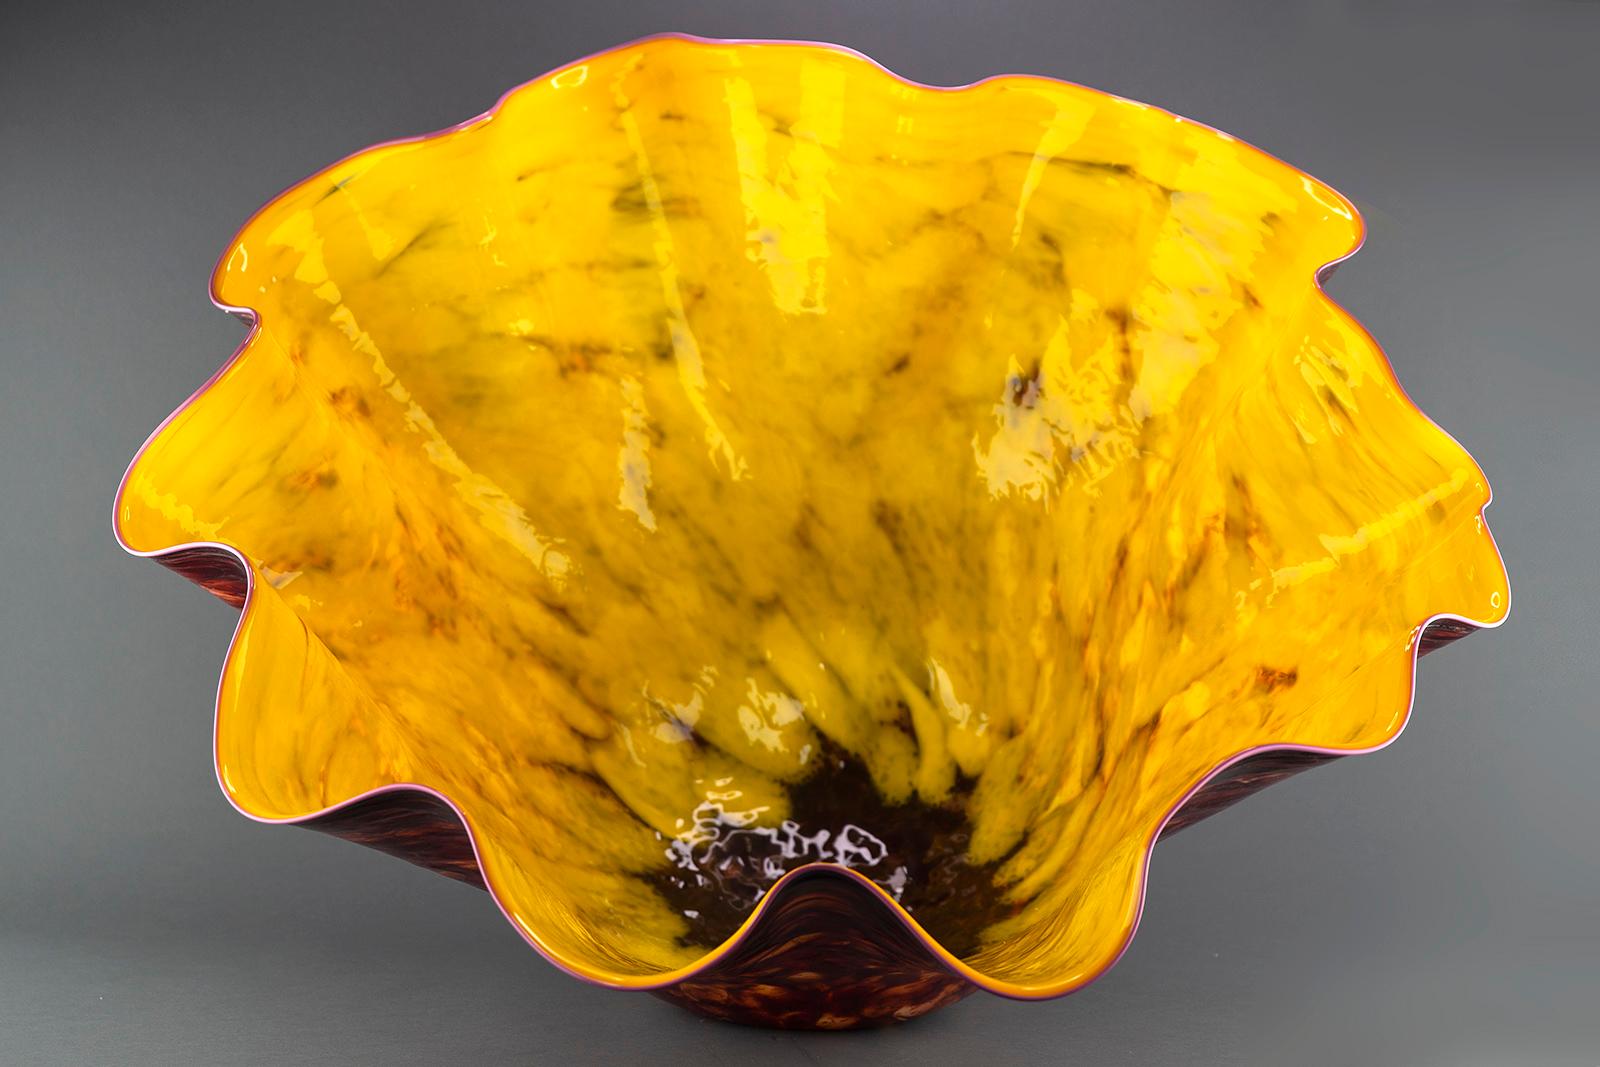 when did dale chihuly start glass blowing